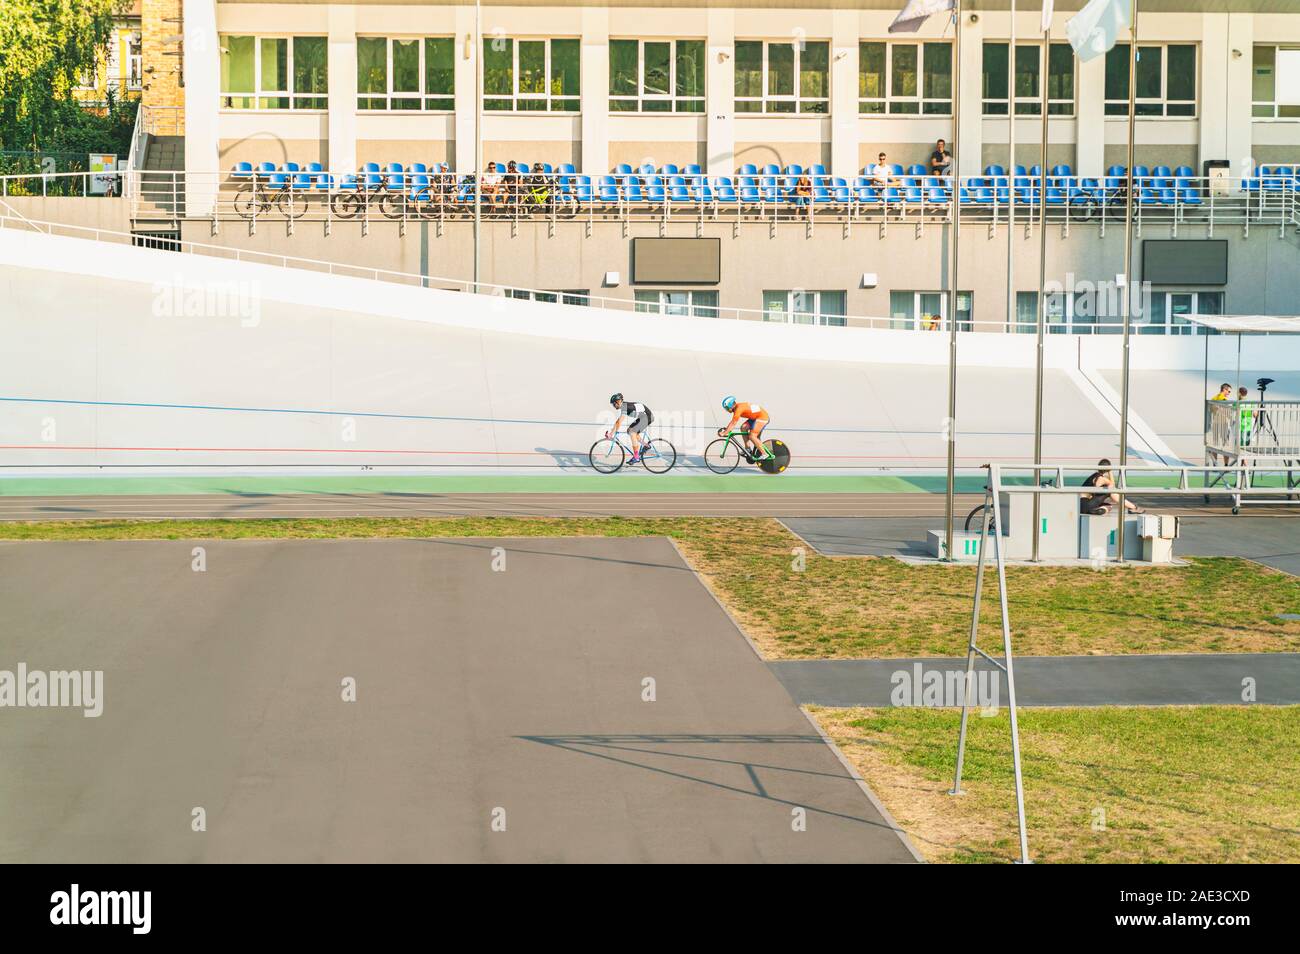 Cycling competition on the stadium in summer. Cyclers running bicycles at high speed. Horizontal image. Stock Photo